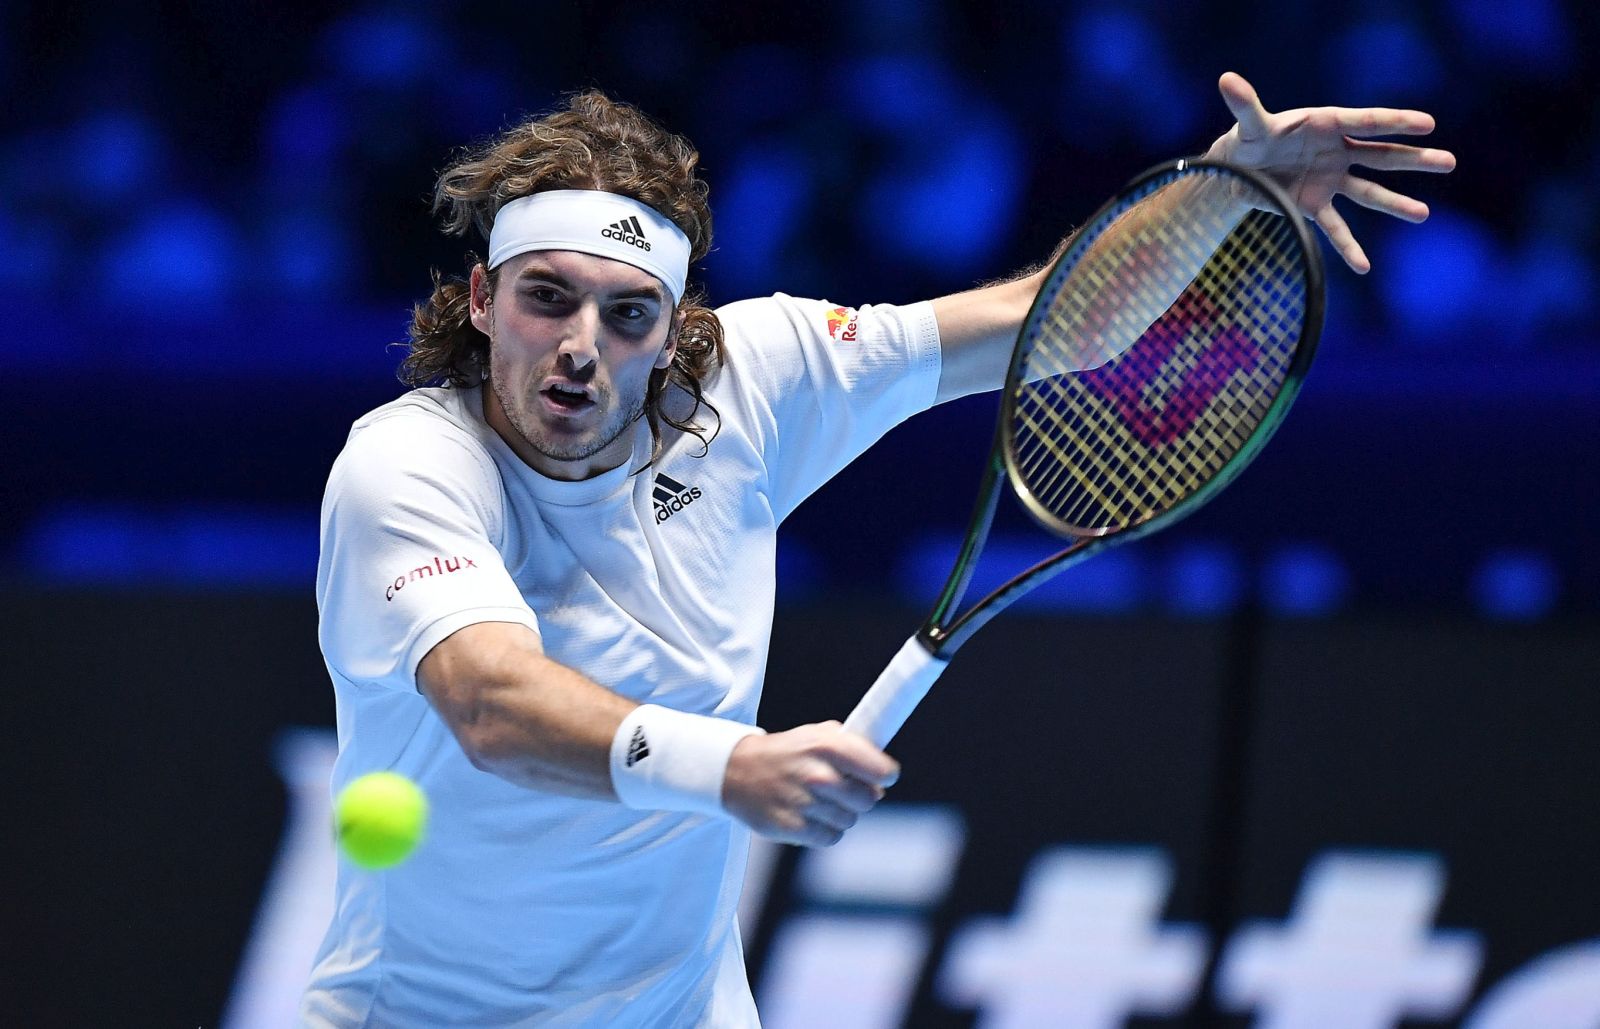 epa09584144 Stefanos Tsitsipas of Greece in action against Andrej Rublev of Russia during their group stage match of the Nitto ATP Finals tennis tournament in Turin, Italy, 15 November 2021.  EPA/Alessandro Di Marco